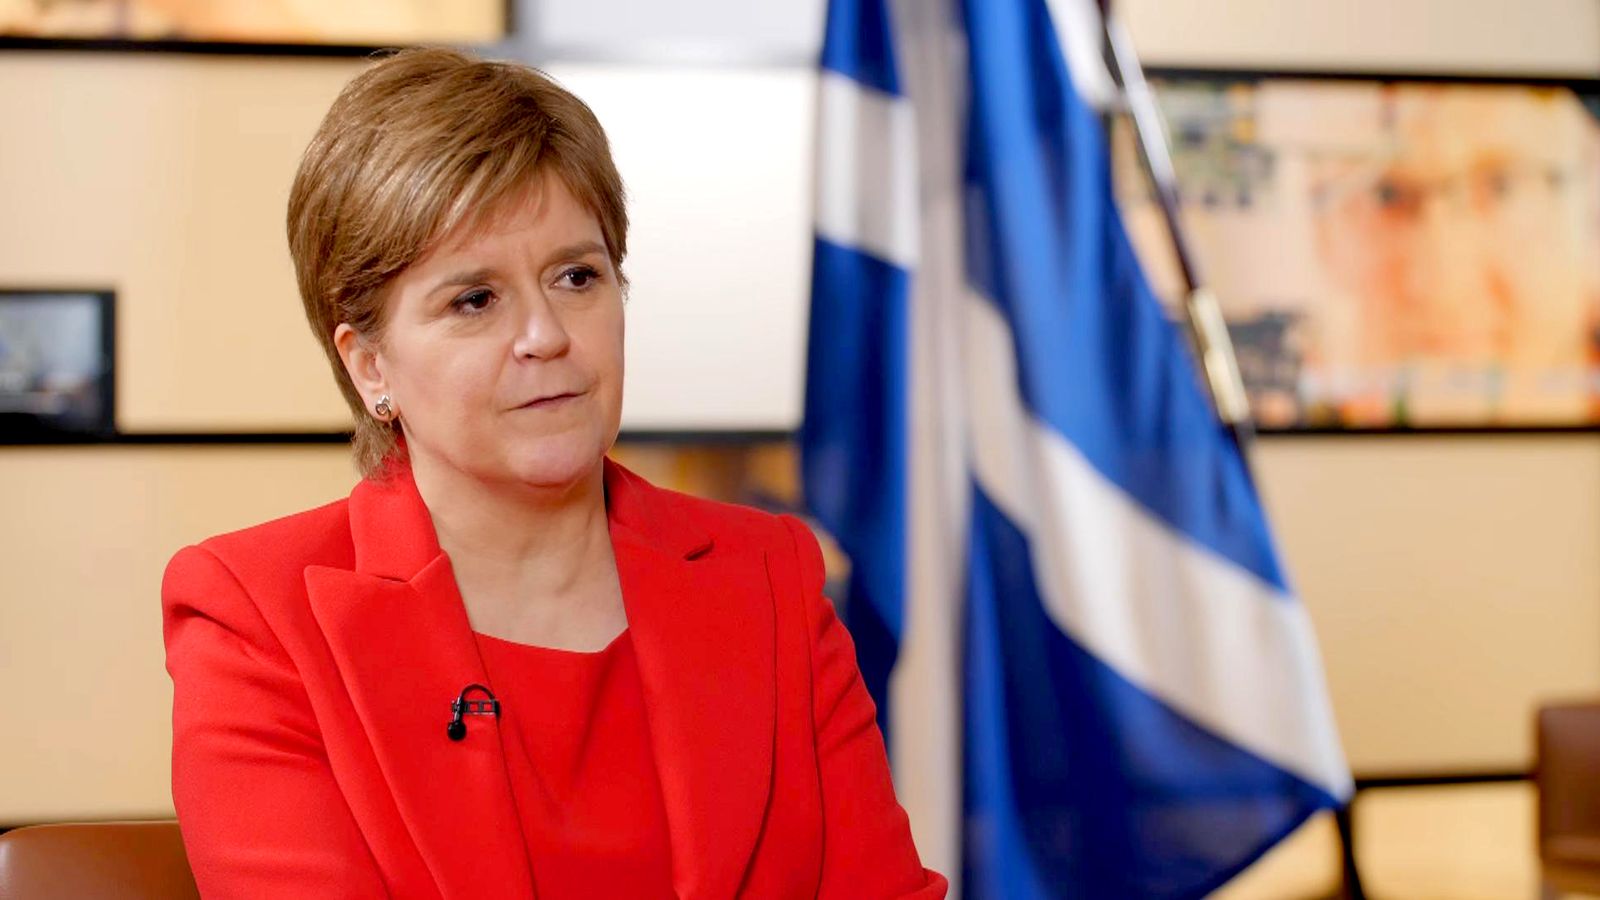 Nicola Sturgeon protests her innocence after she is arrested and released without charge